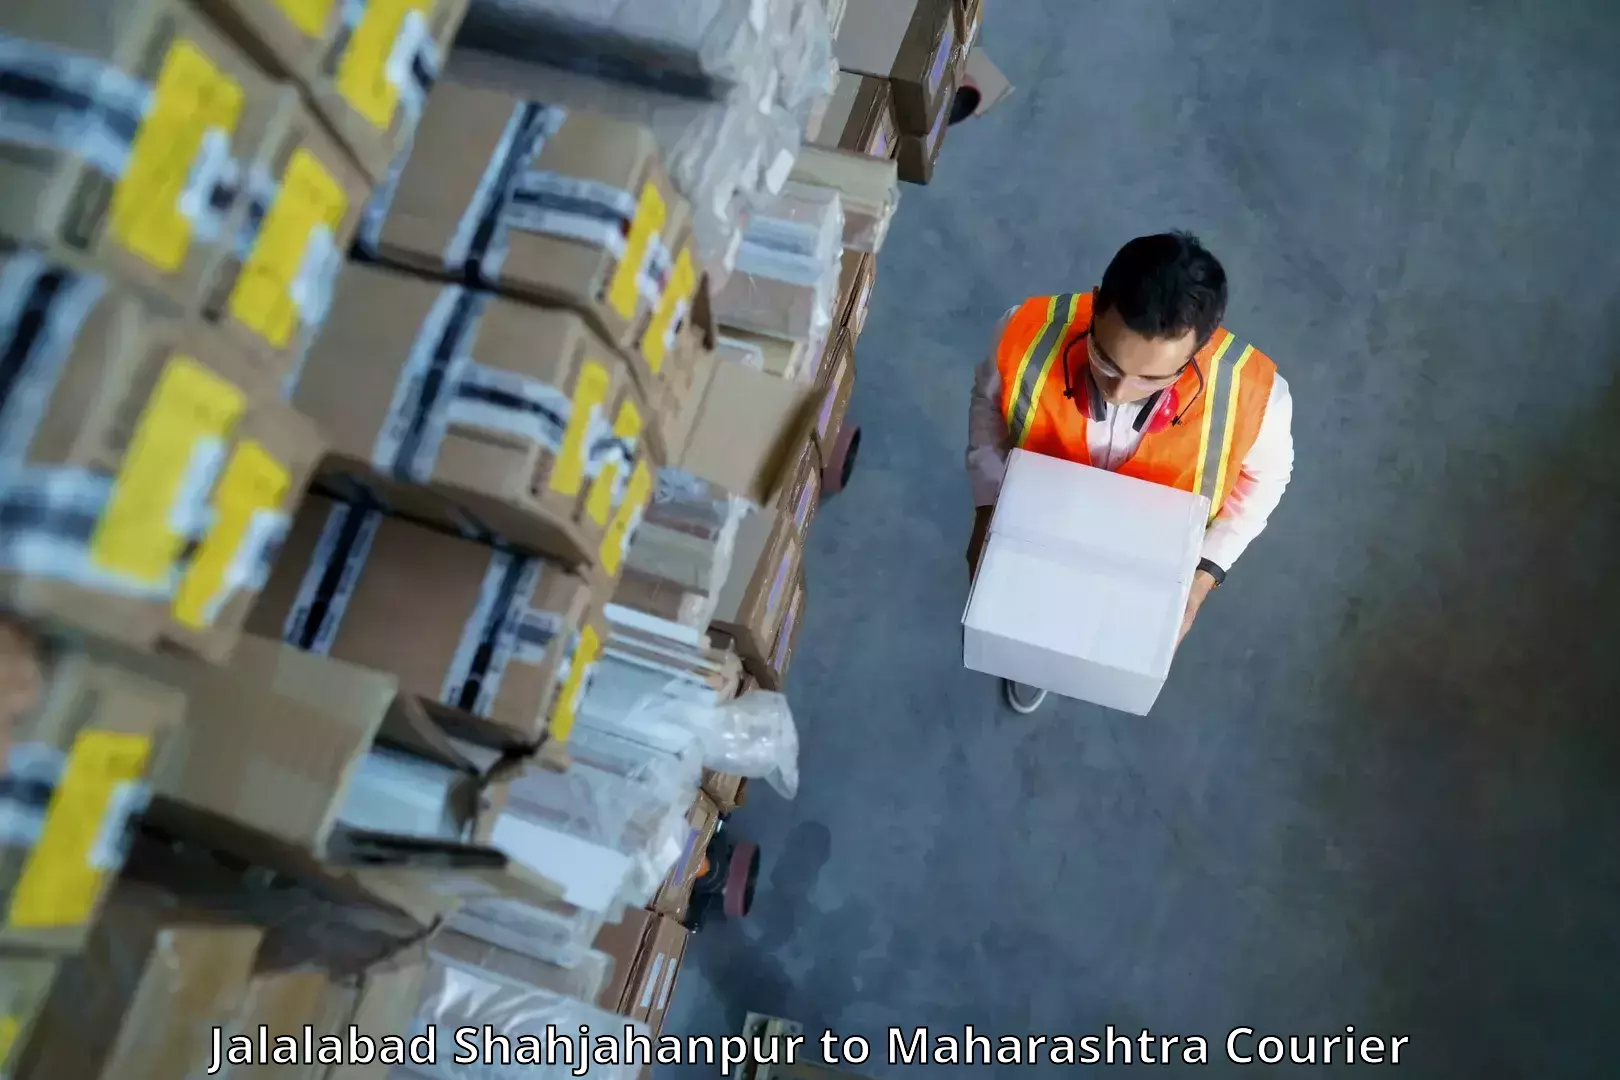 Multi-national courier services Jalalabad Shahjahanpur to Shringartali